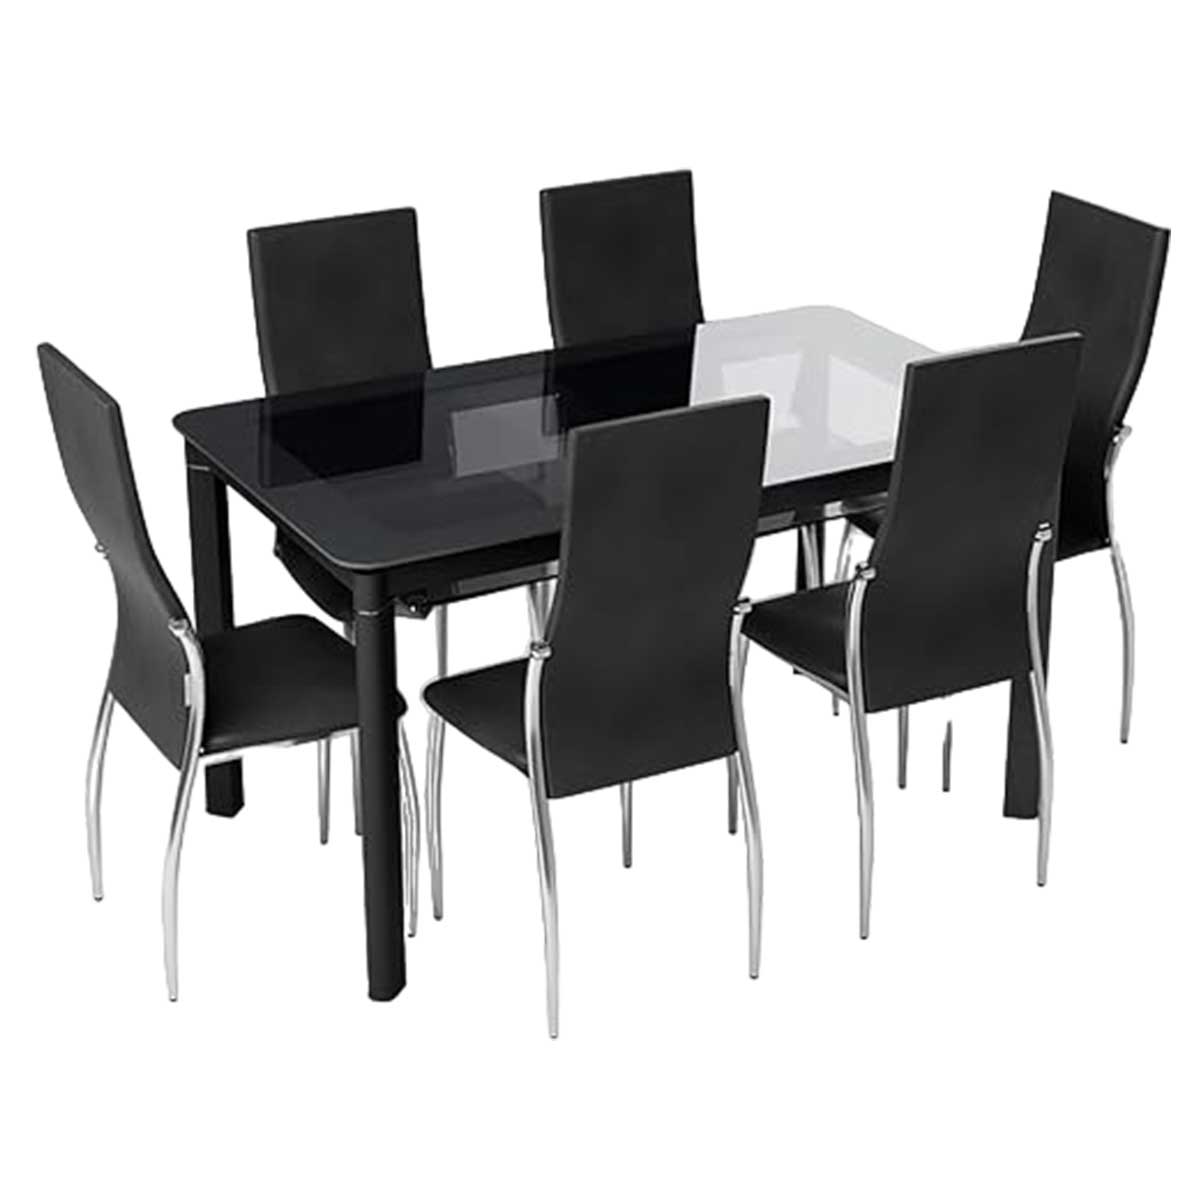 Cafeteria Furniture Set Manufacturers, Suppliers in Dwarka Sector 22